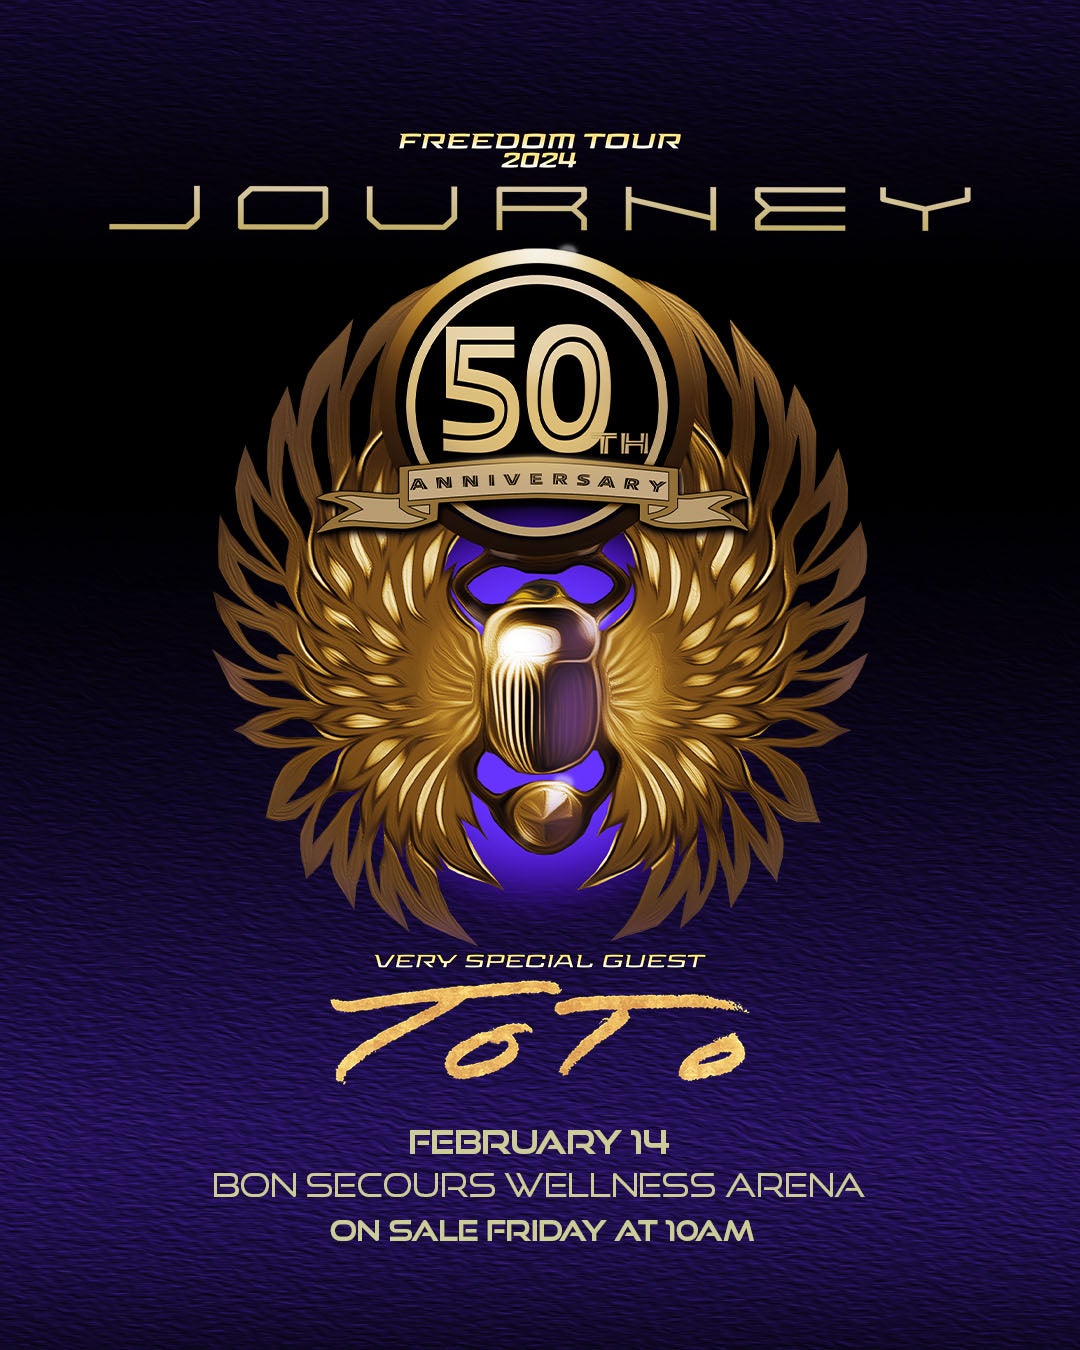 Journey Freedom Tour 2024 Schedule Your Ultimate Guide